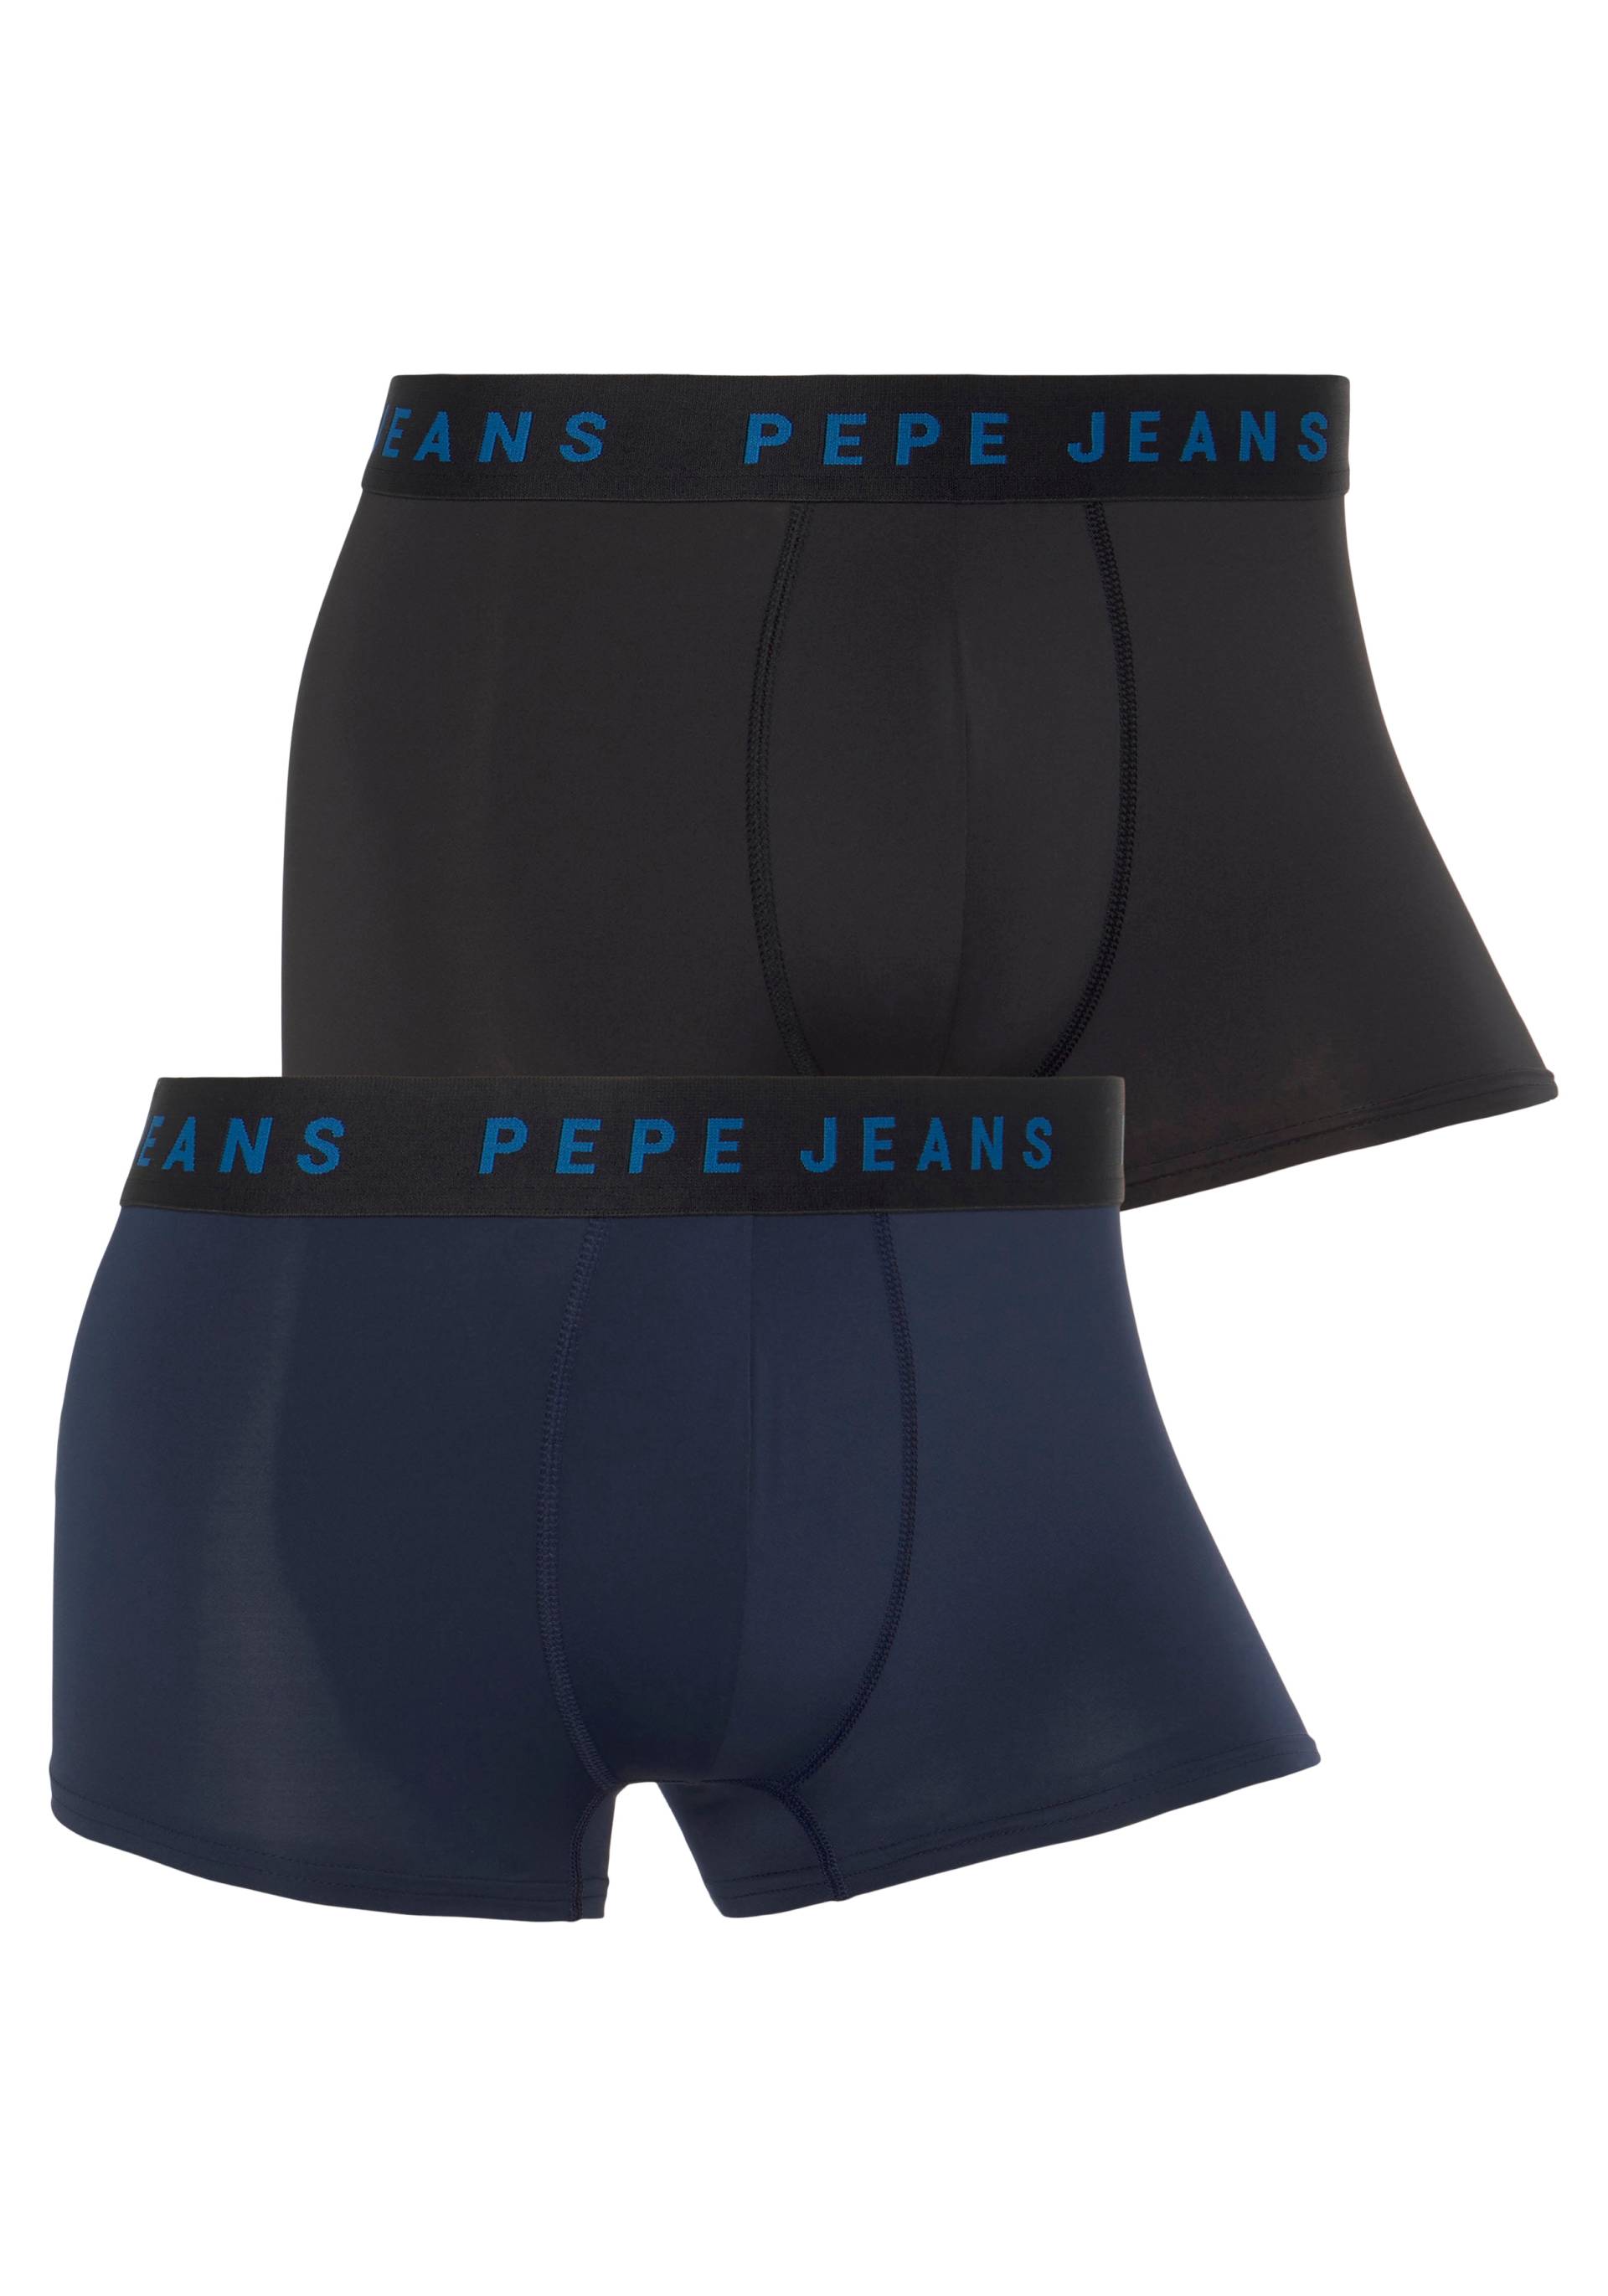 Pepe Jeans Boxershorts, (Packung, 2 St.) von Pepe Jeans